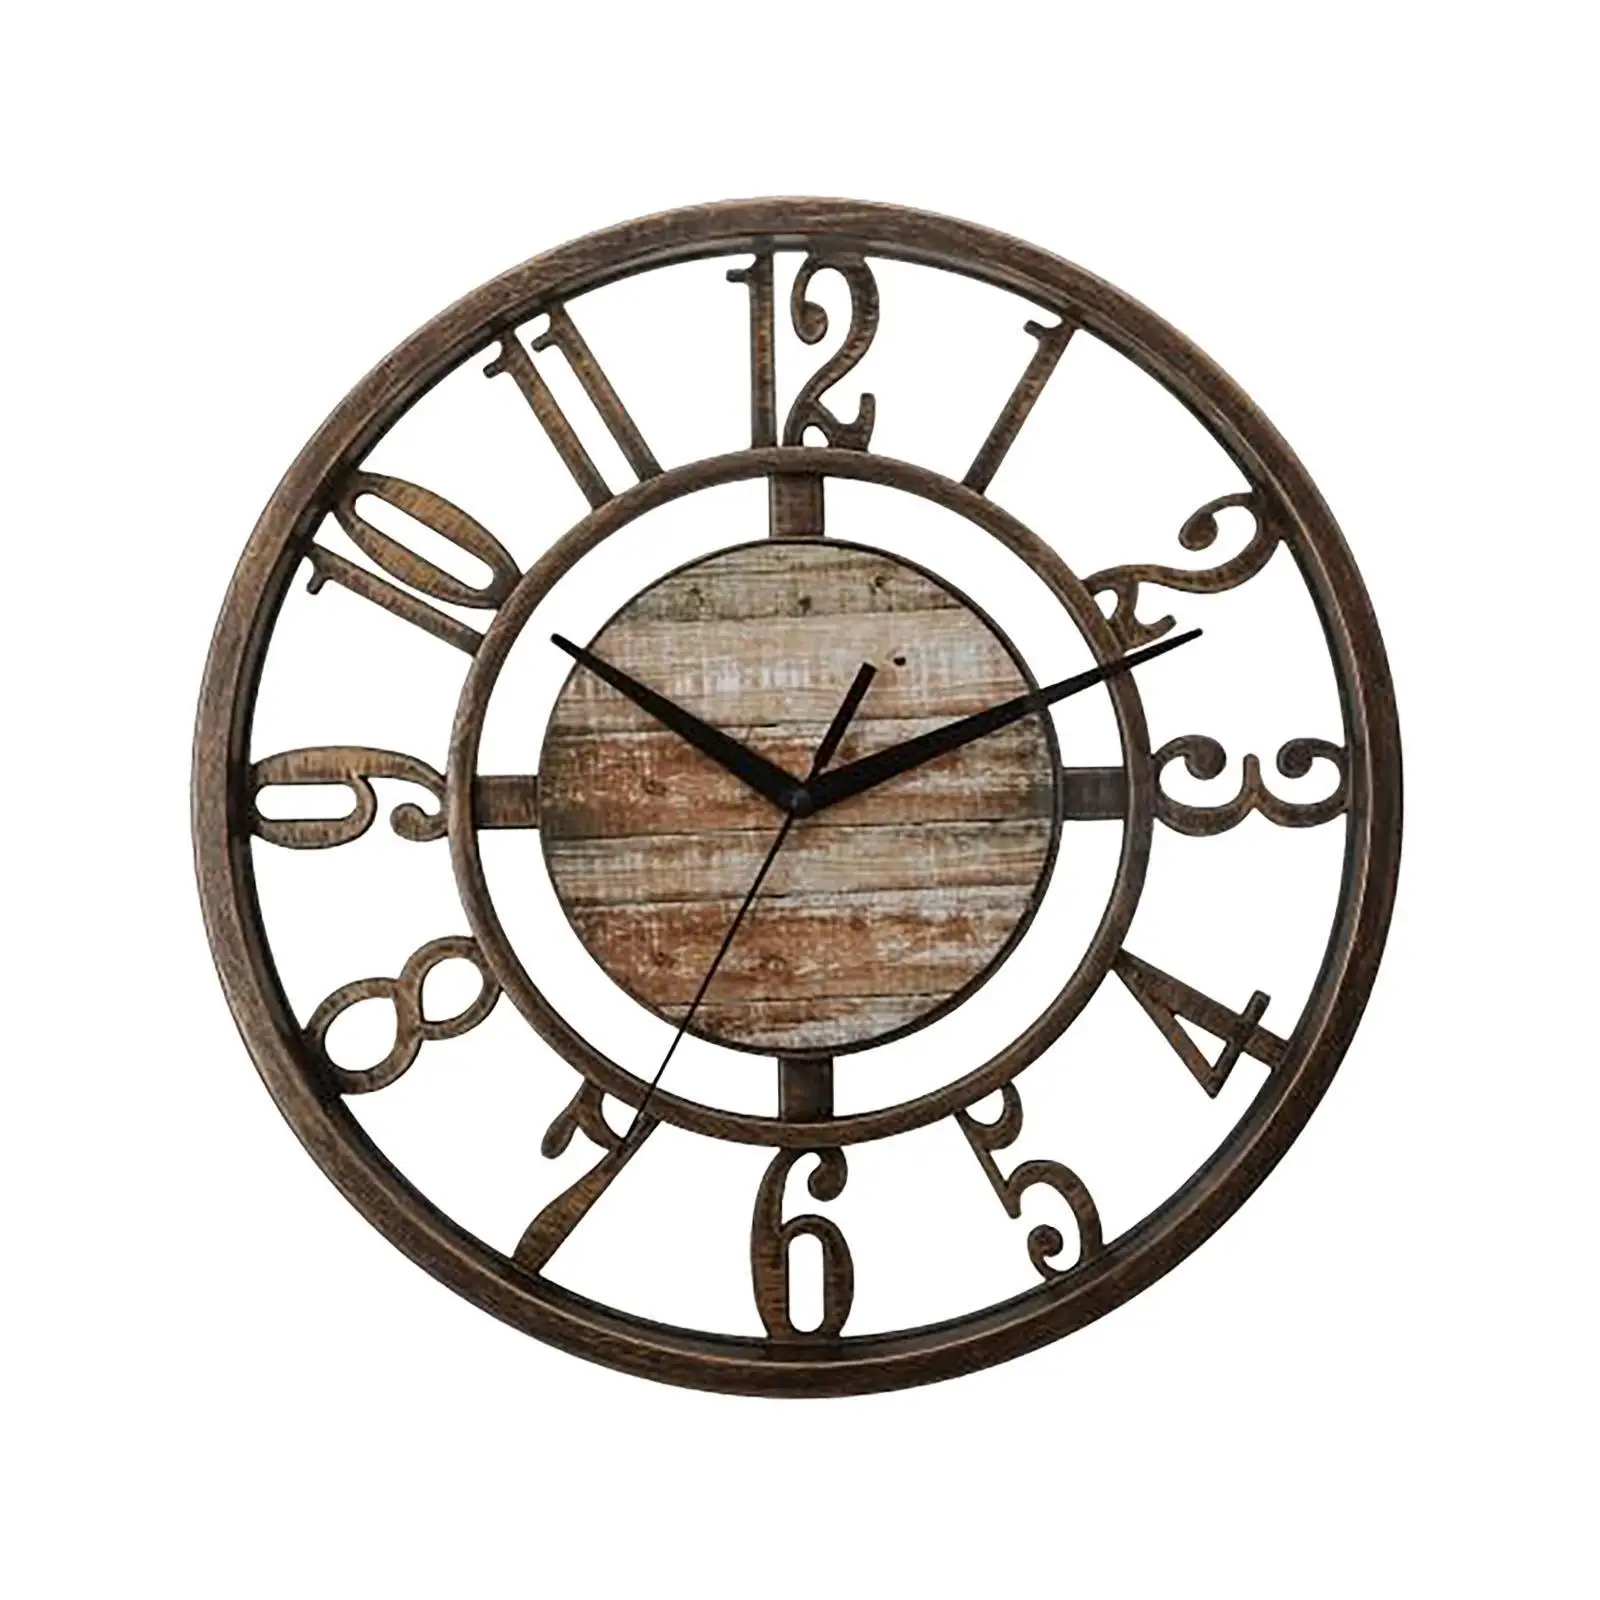 Wall Clock Quiet Hollow Design Decorative Easy to Read Gifts Analog Clock 11 inch for Farmhouse KidS Room Bedroom Study Office